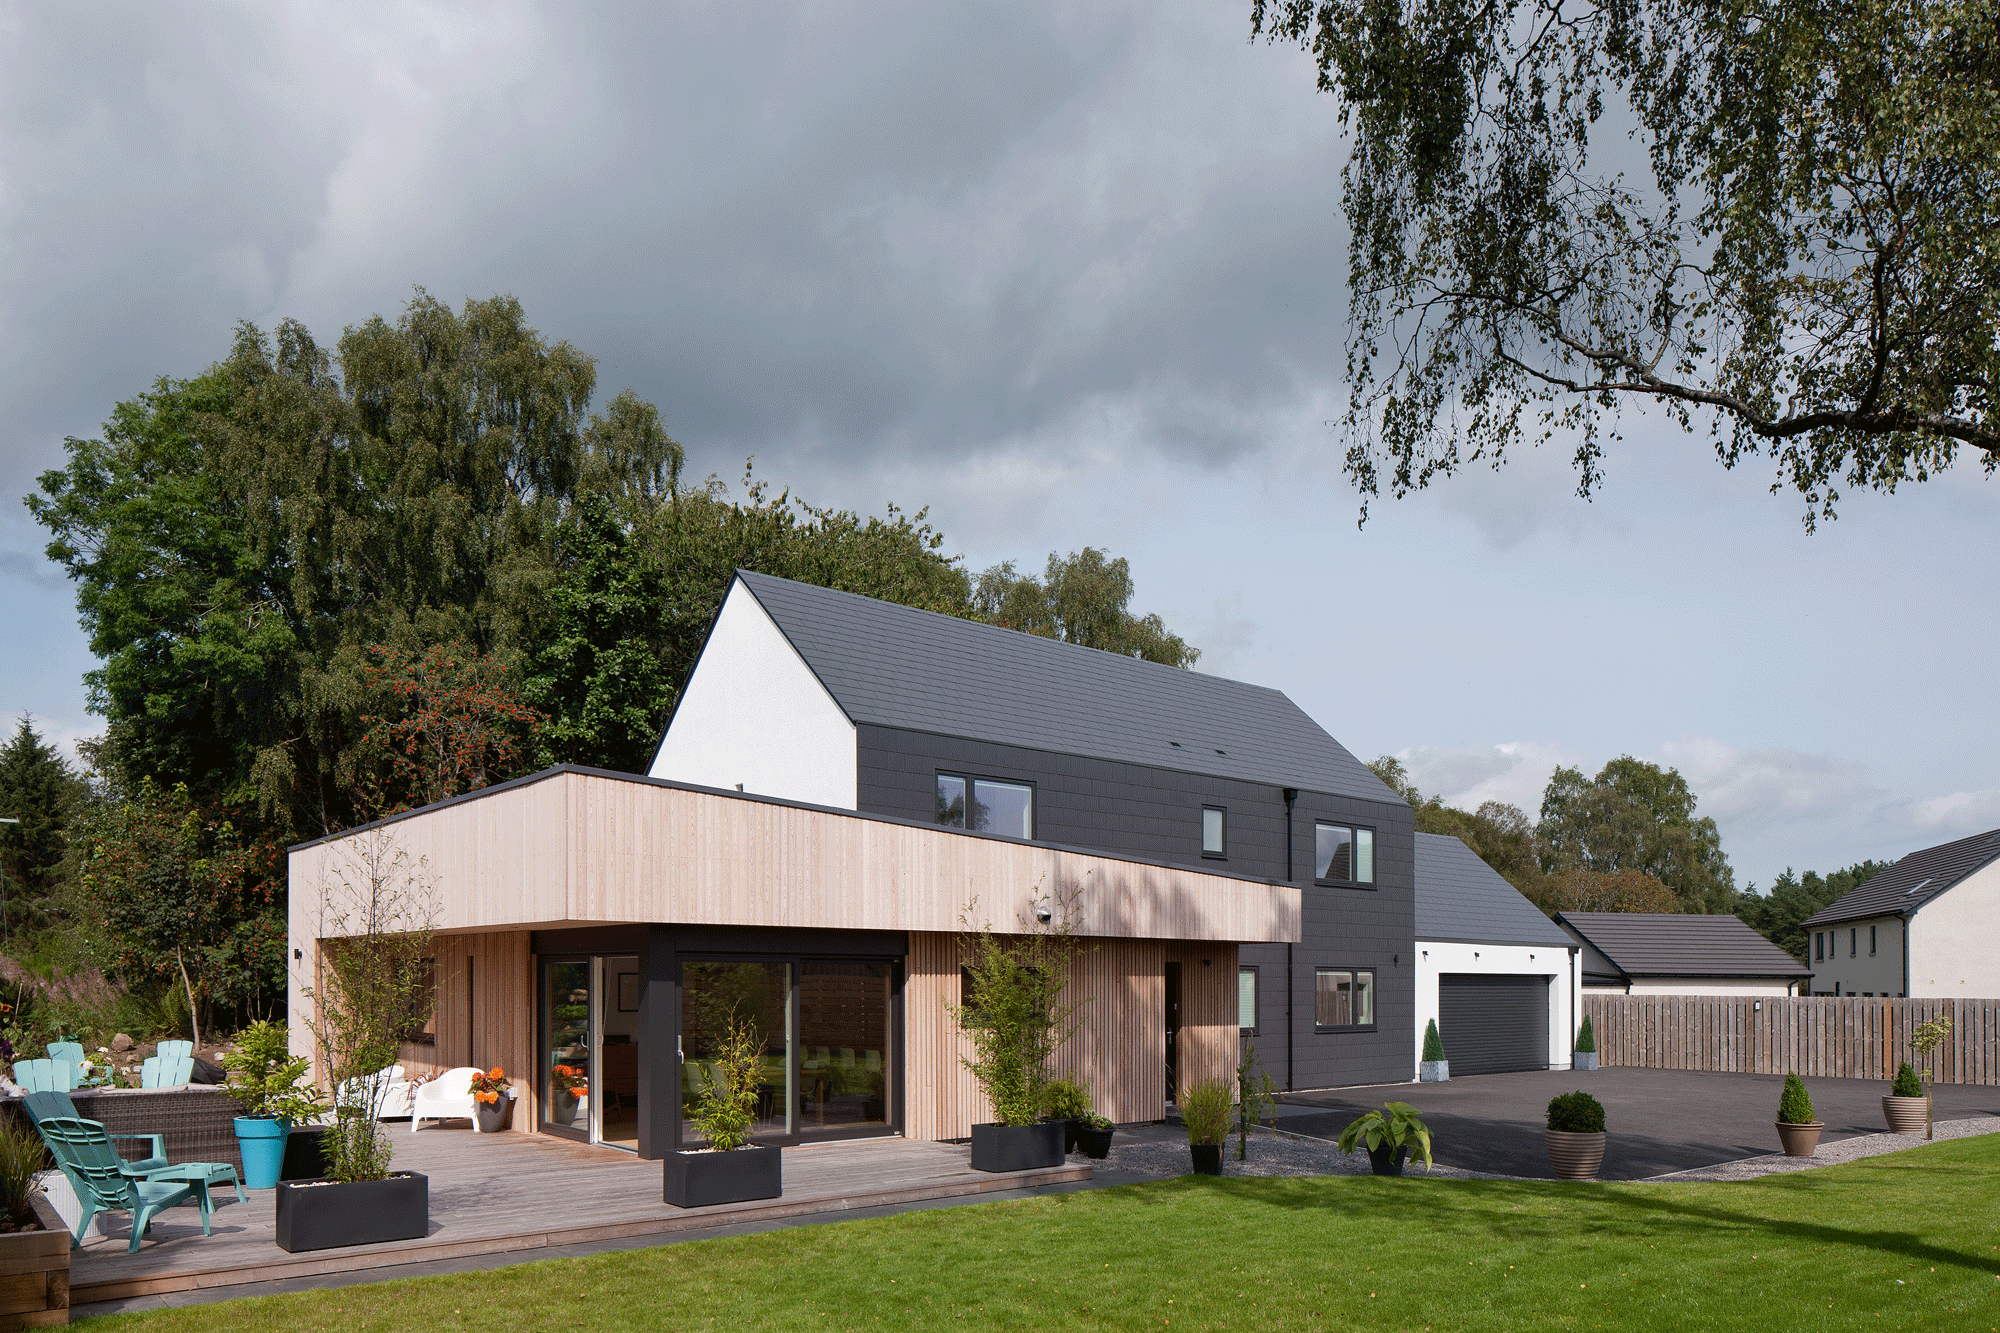 Nordic-inspired timber frame home